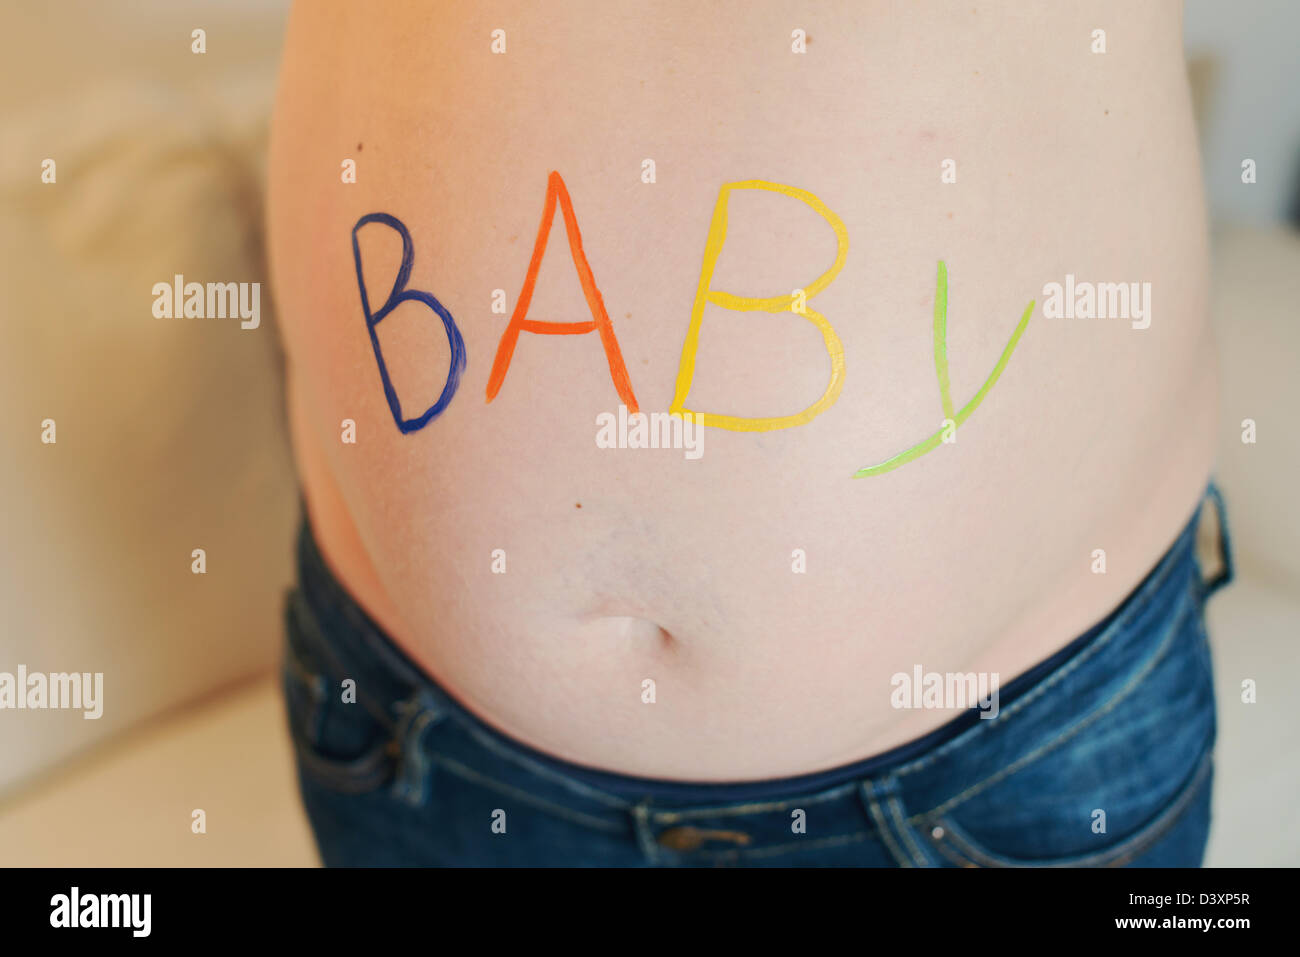 'Baby' is in colorful letters on the baby belly of a pregnant woman. Stock Photo